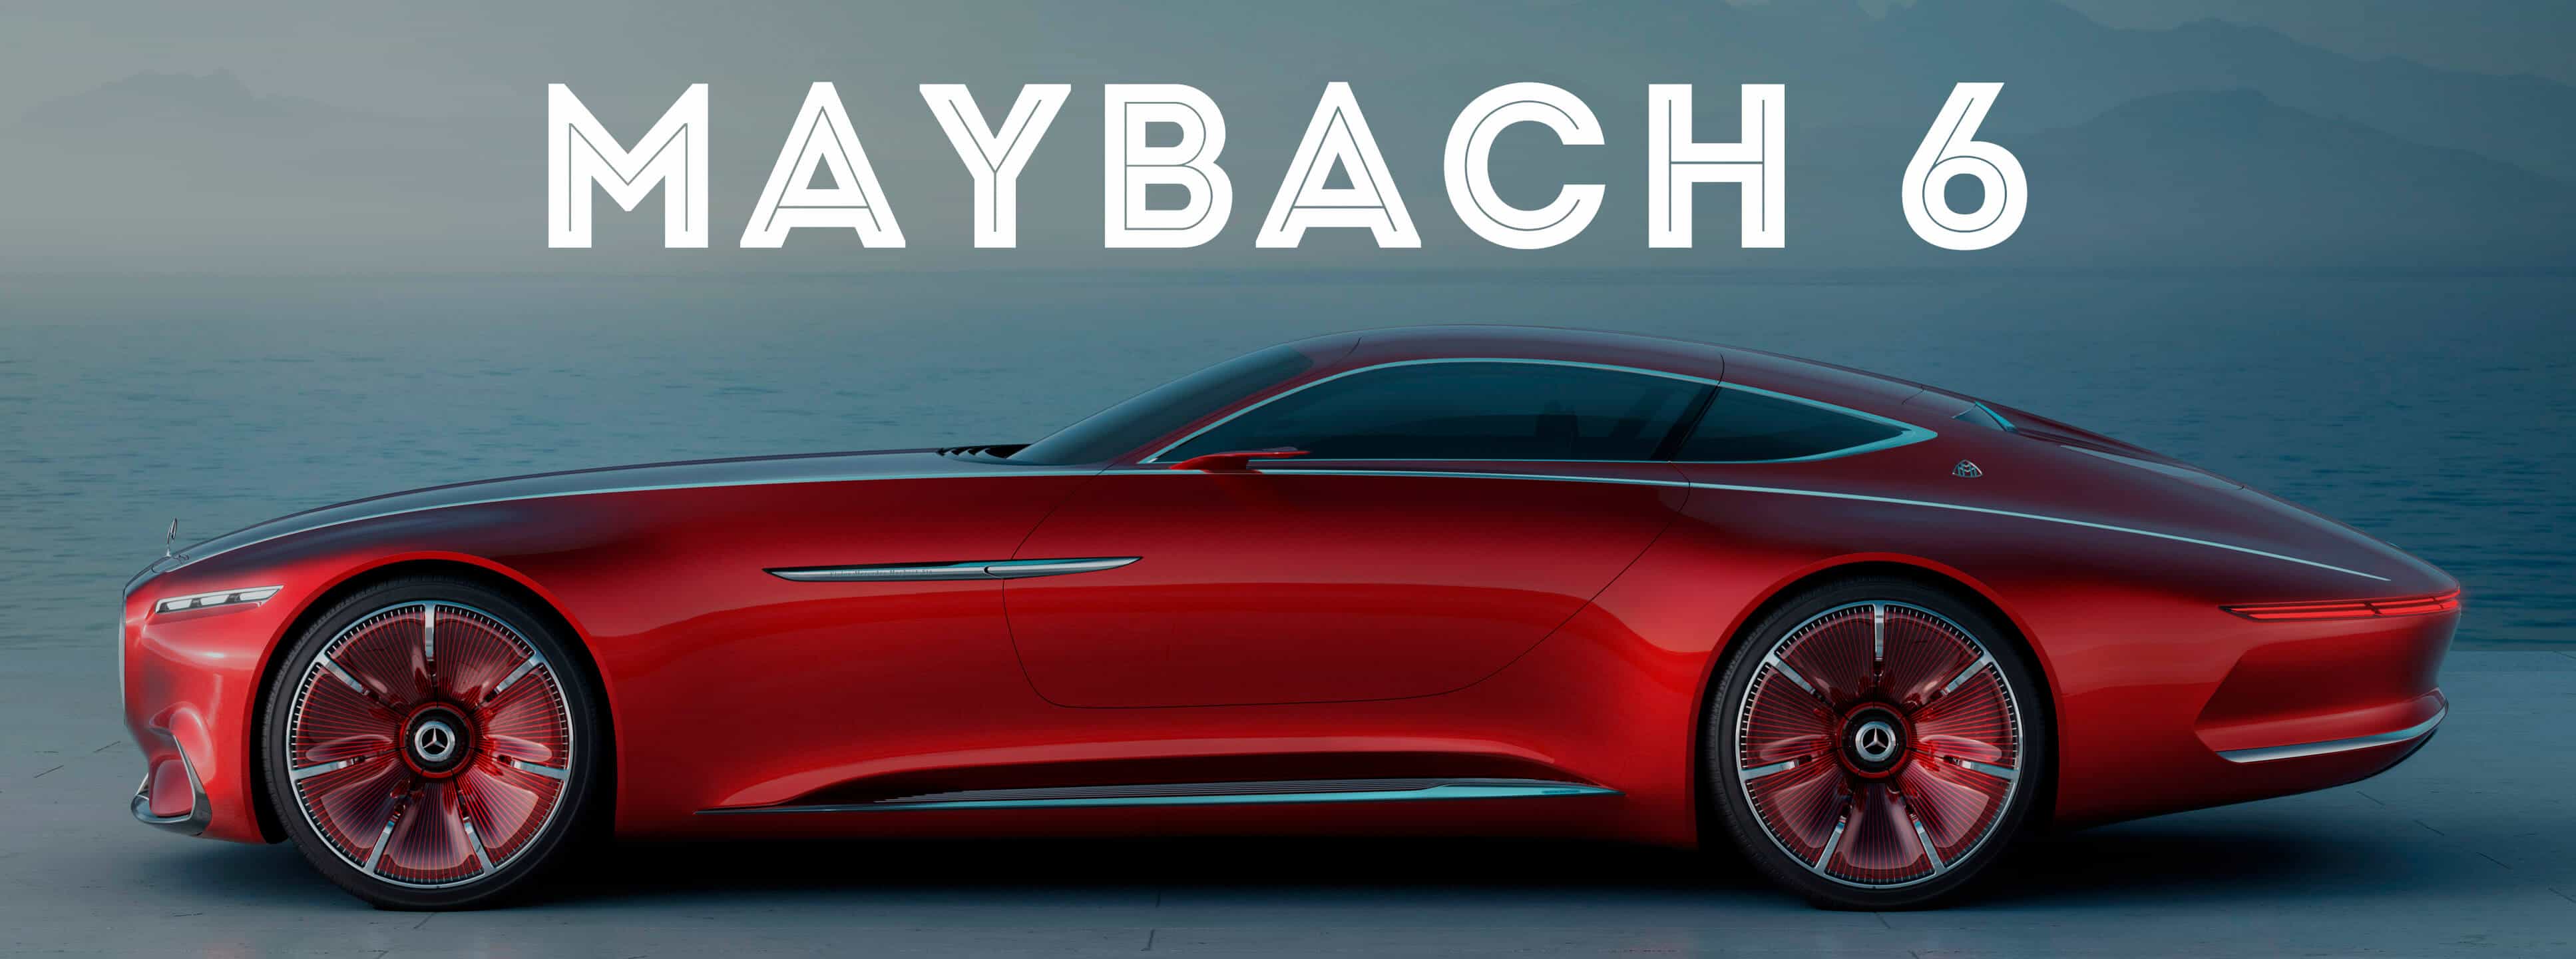 Mercedes Maybach 6 - The Future Vision of Electric Luxury ...